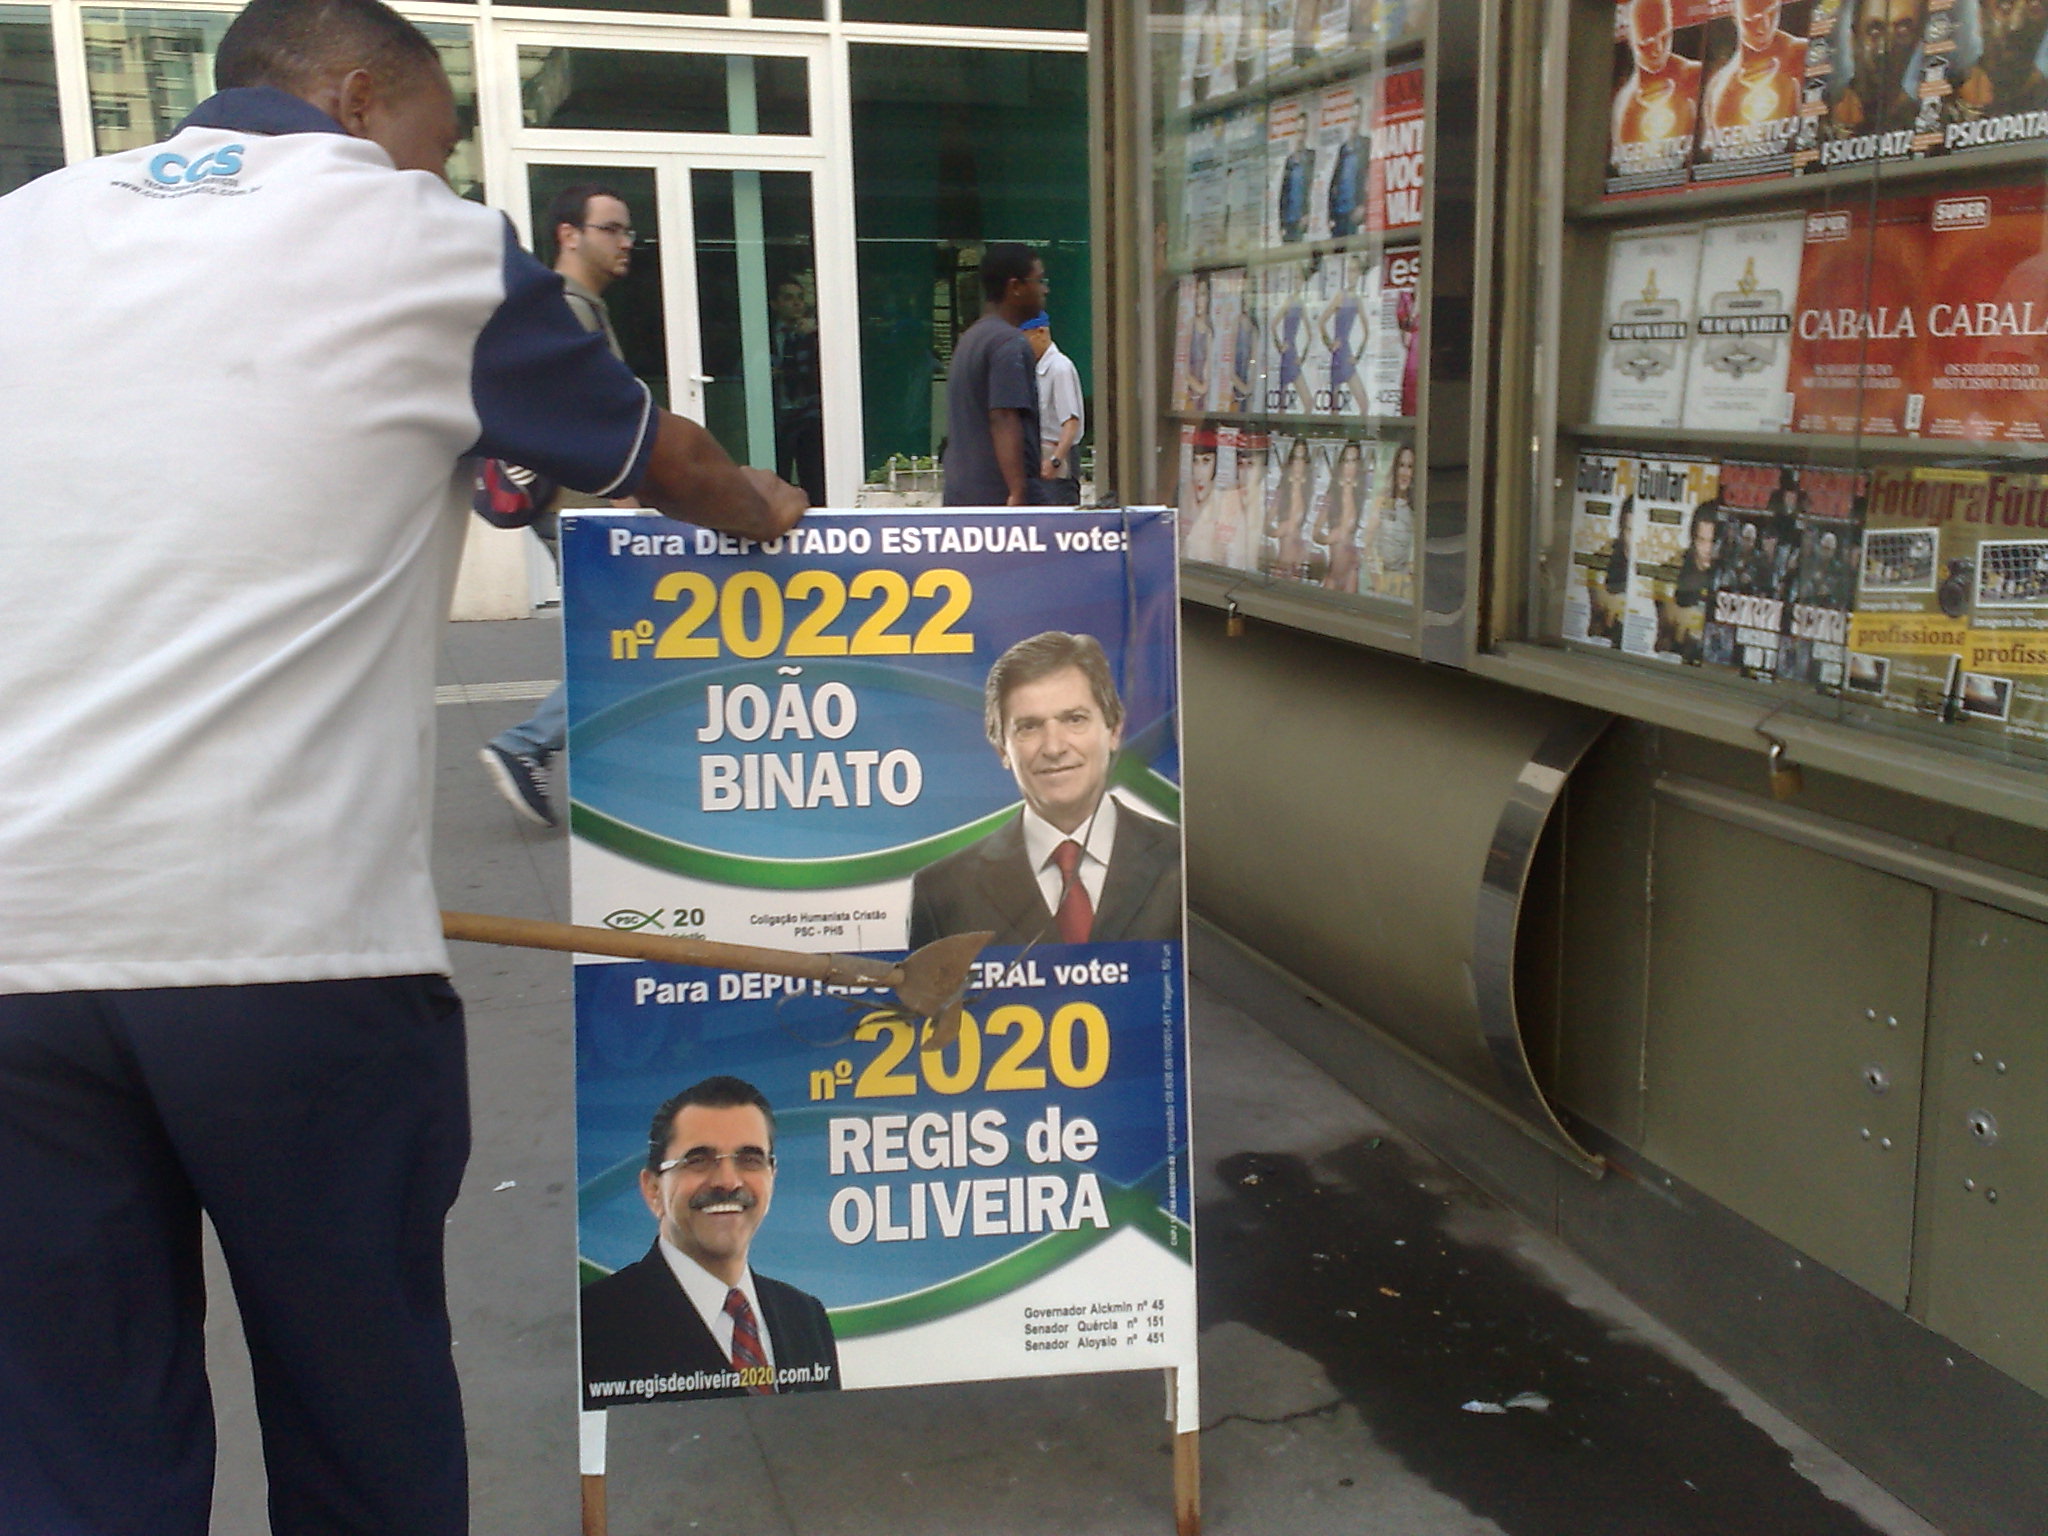 there is a man selling election posters